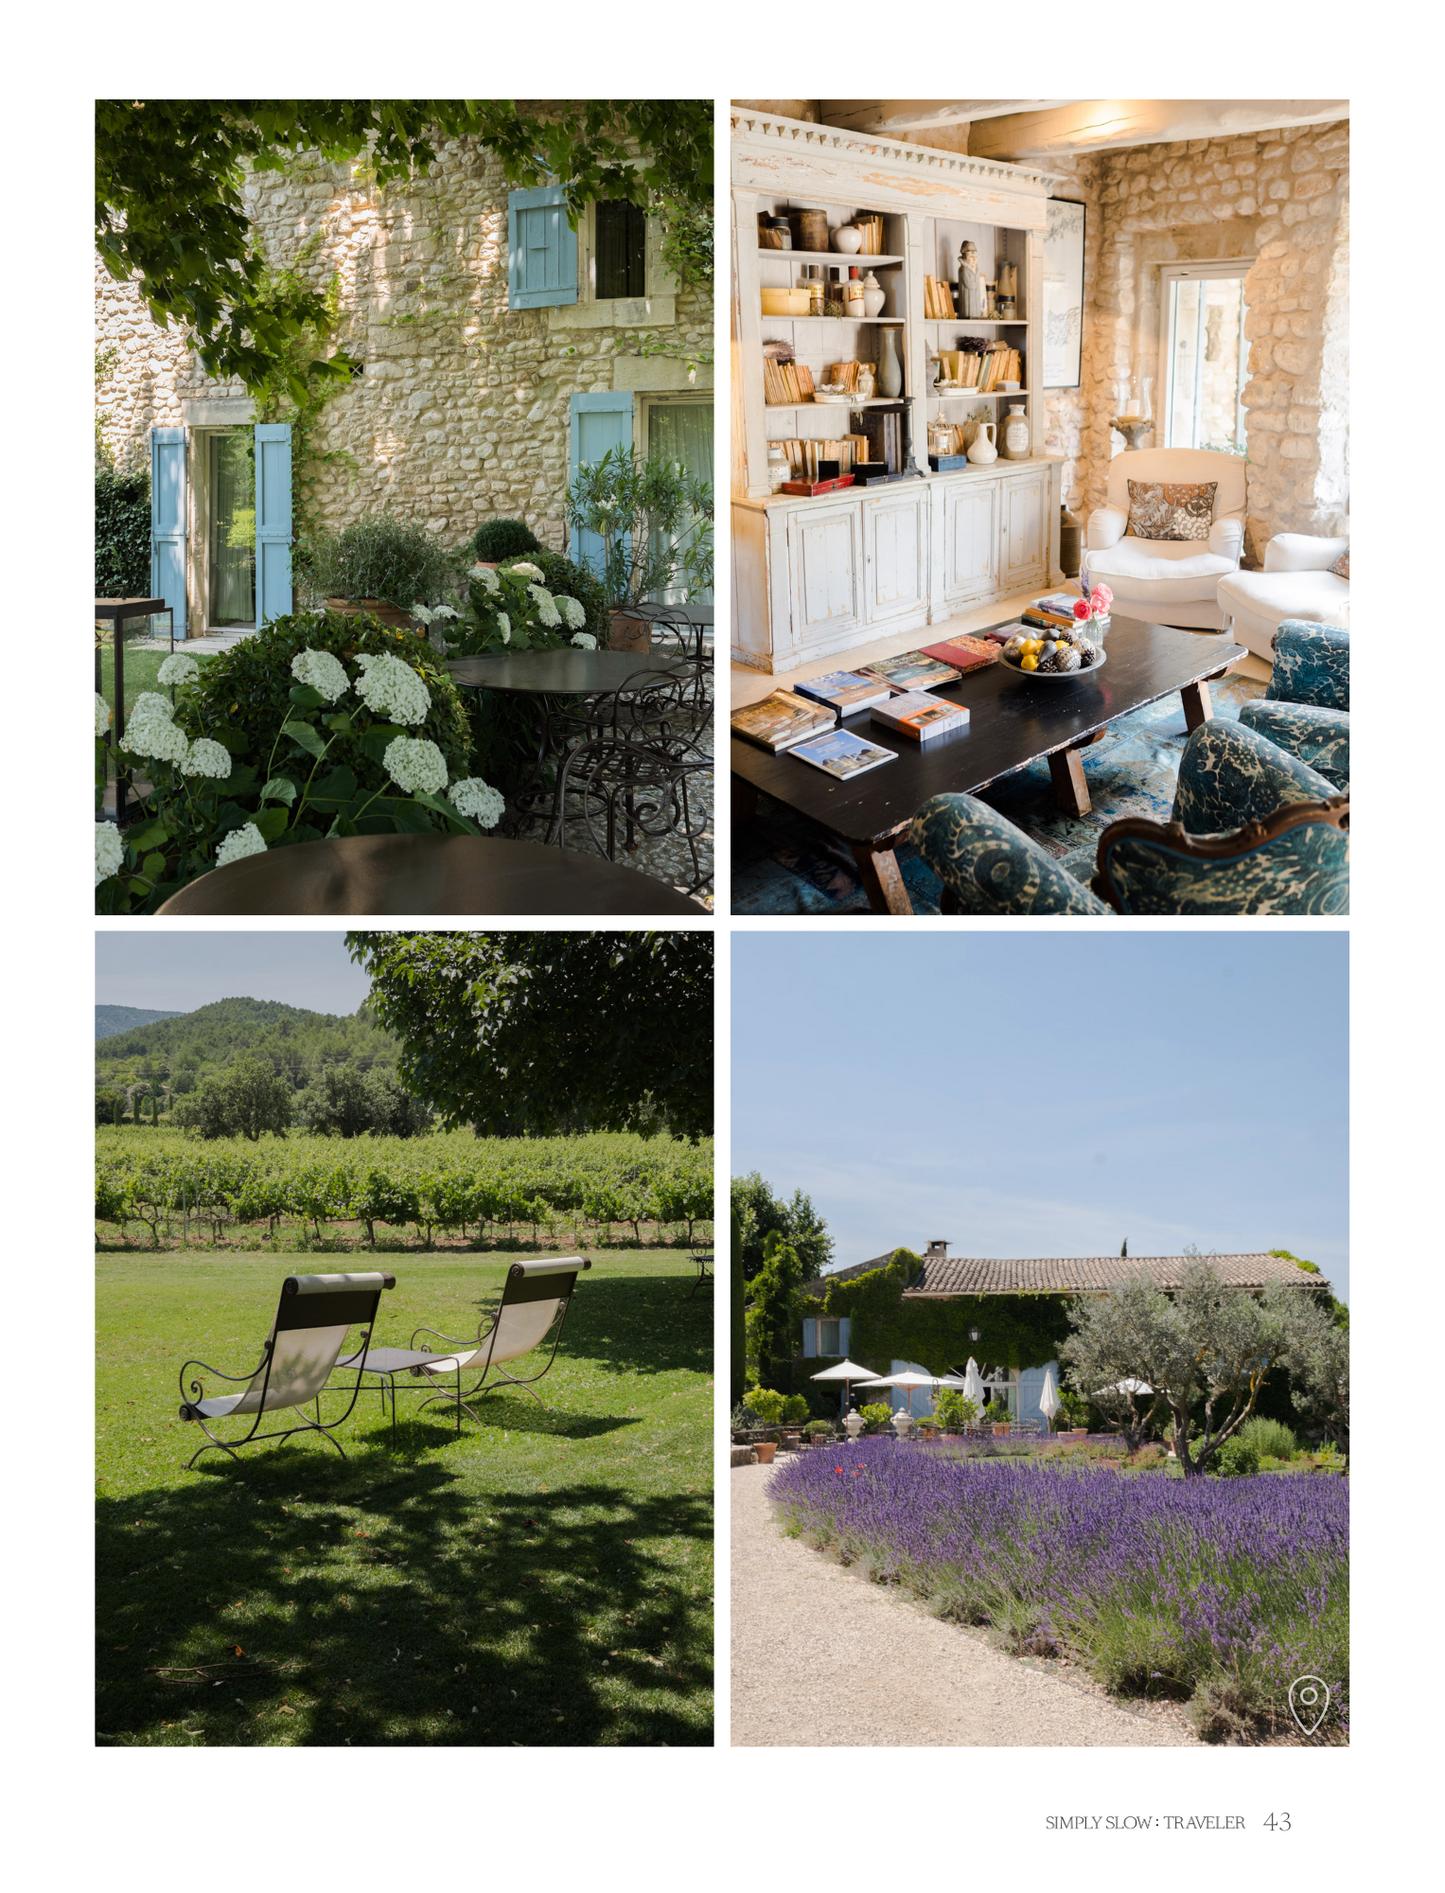 A Guide to Provence - page with photos from La Bastide de Marie, by Simply Slow Traveler